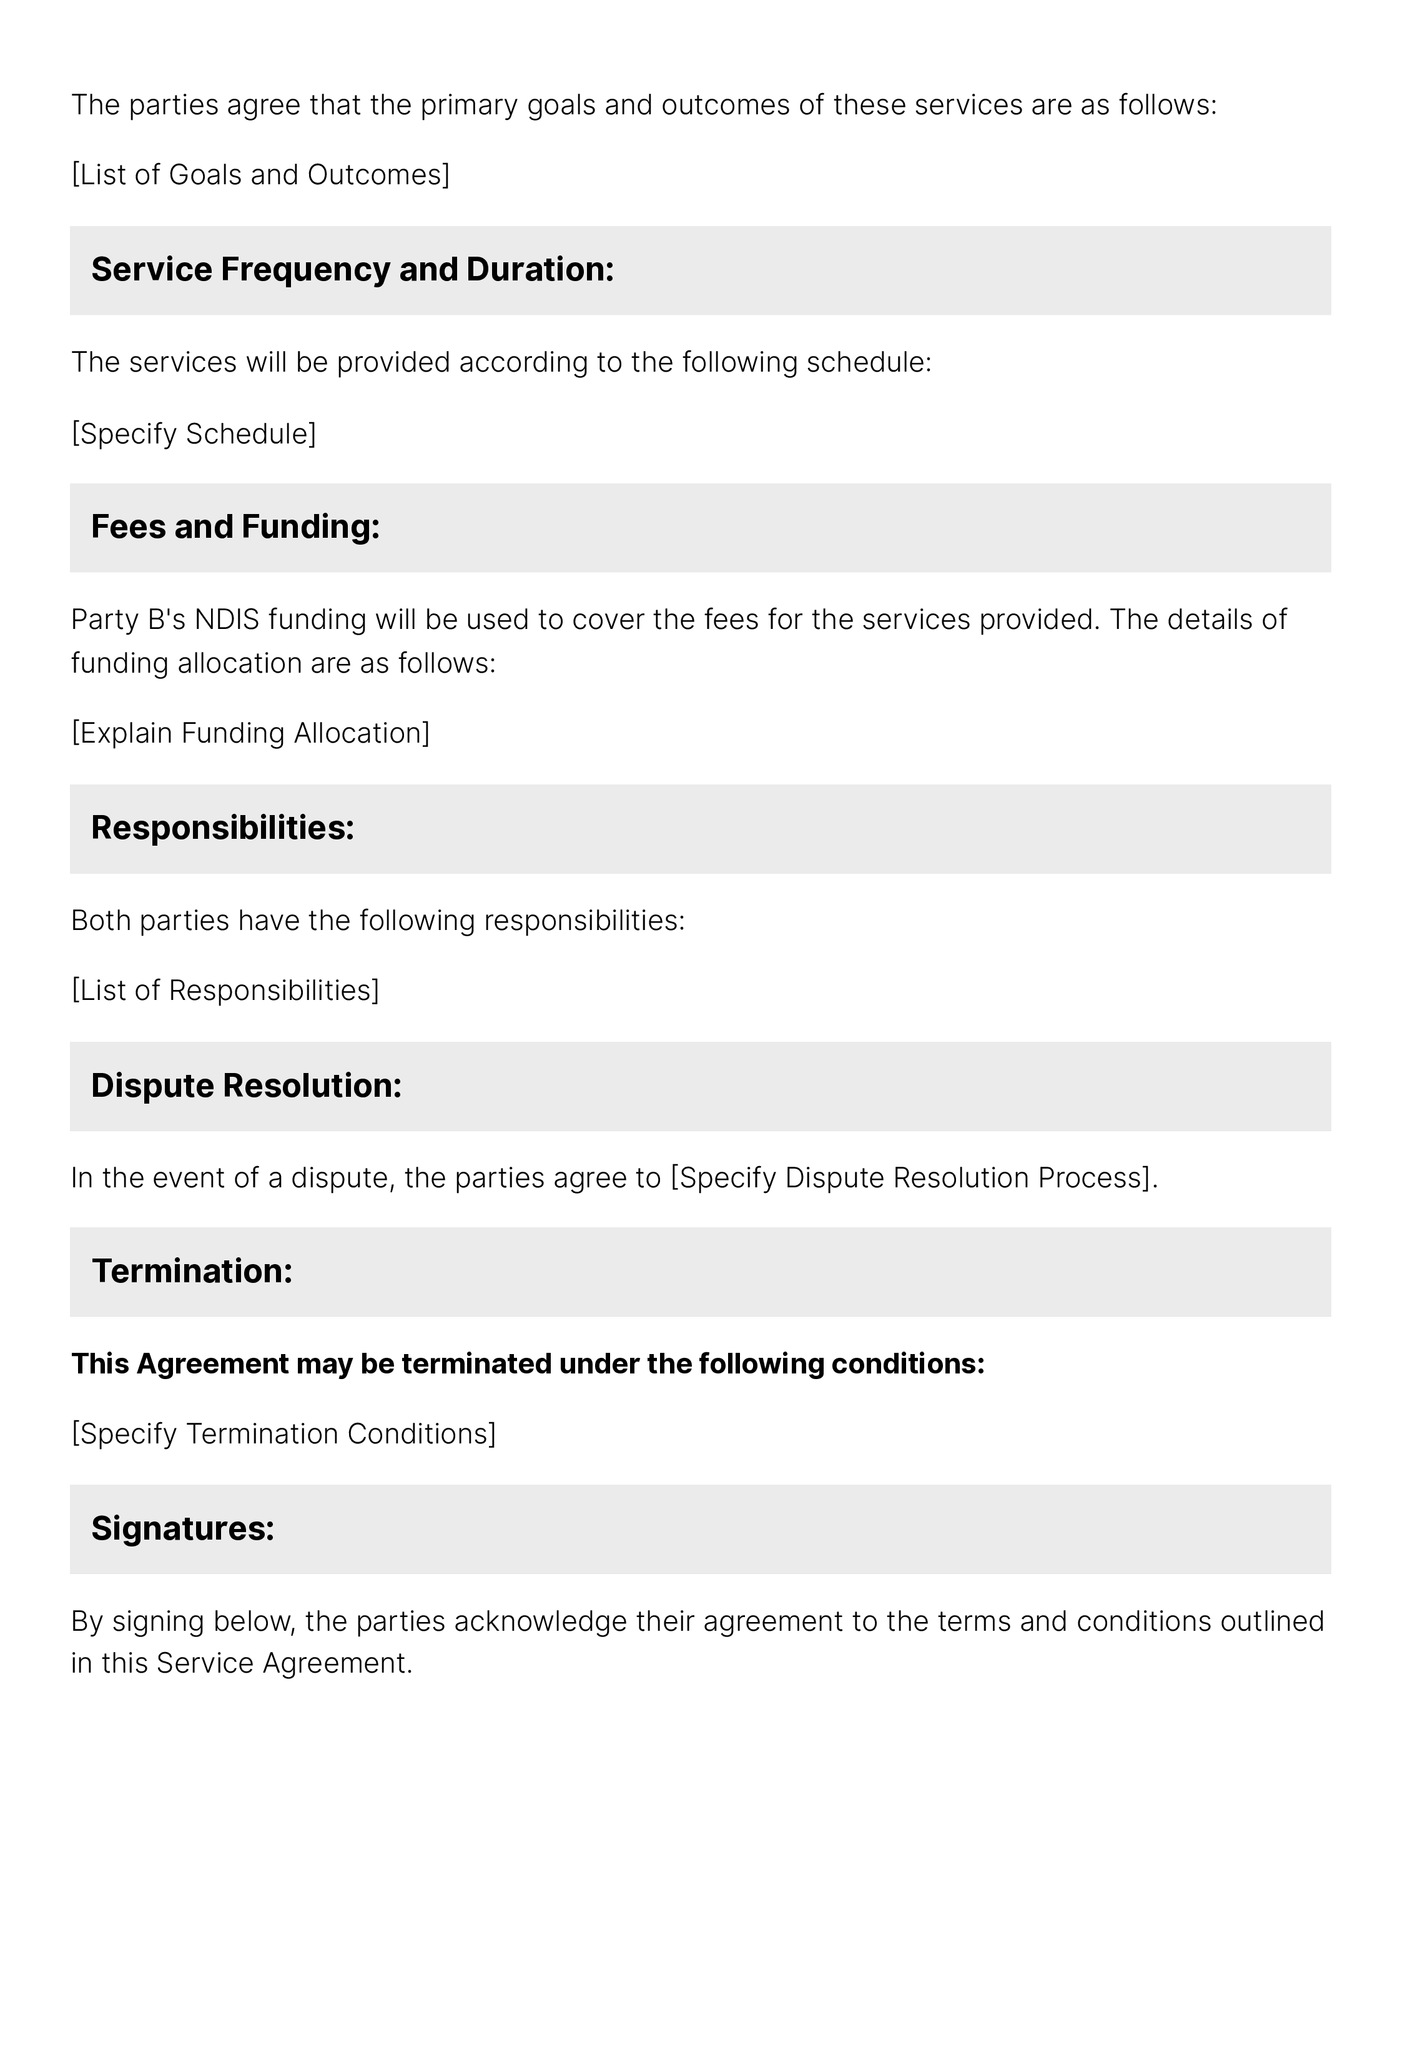 second page of service agreement template for organizations and NDIS participants